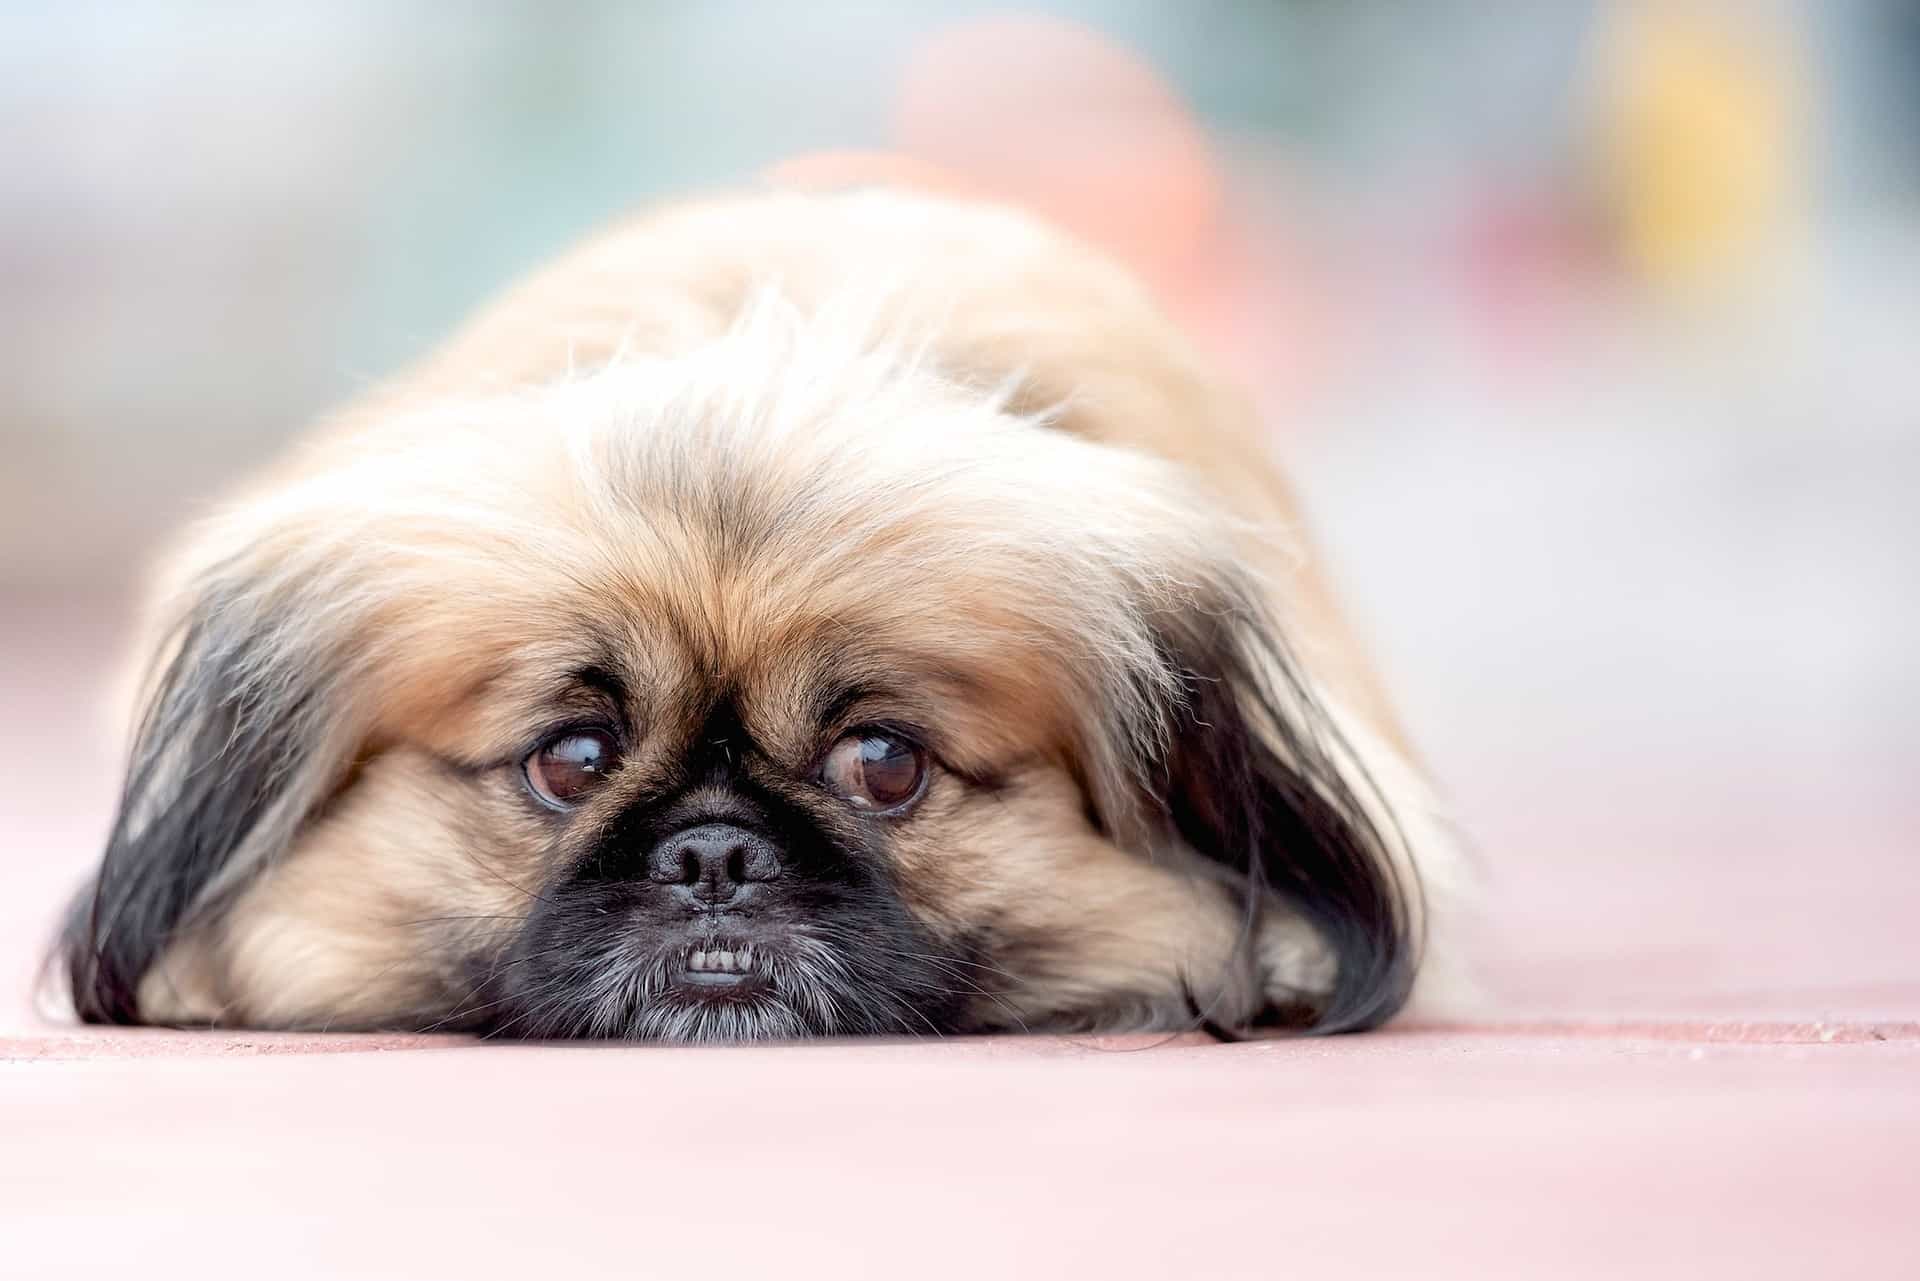 Can You Pass This Geography Quiz Where Every Question Comes With a 🐶 Dog-Related Clue? Pekingese